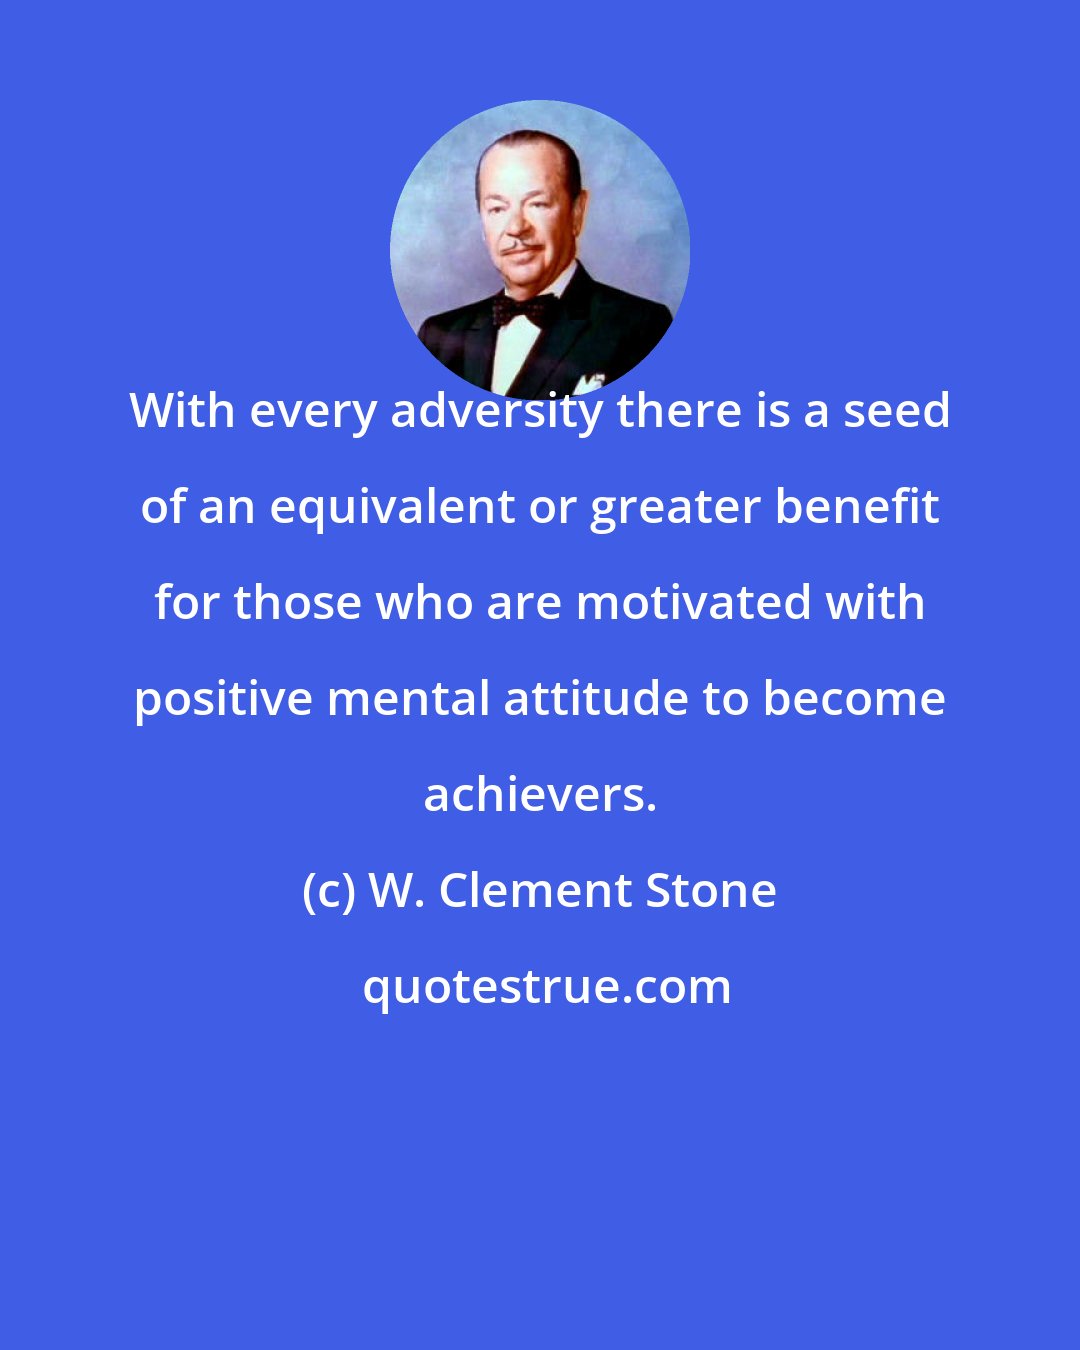 W. Clement Stone: With every adversity there is a seed of an equivalent or greater benefit for those who are motivated with positive mental attitude to become achievers.